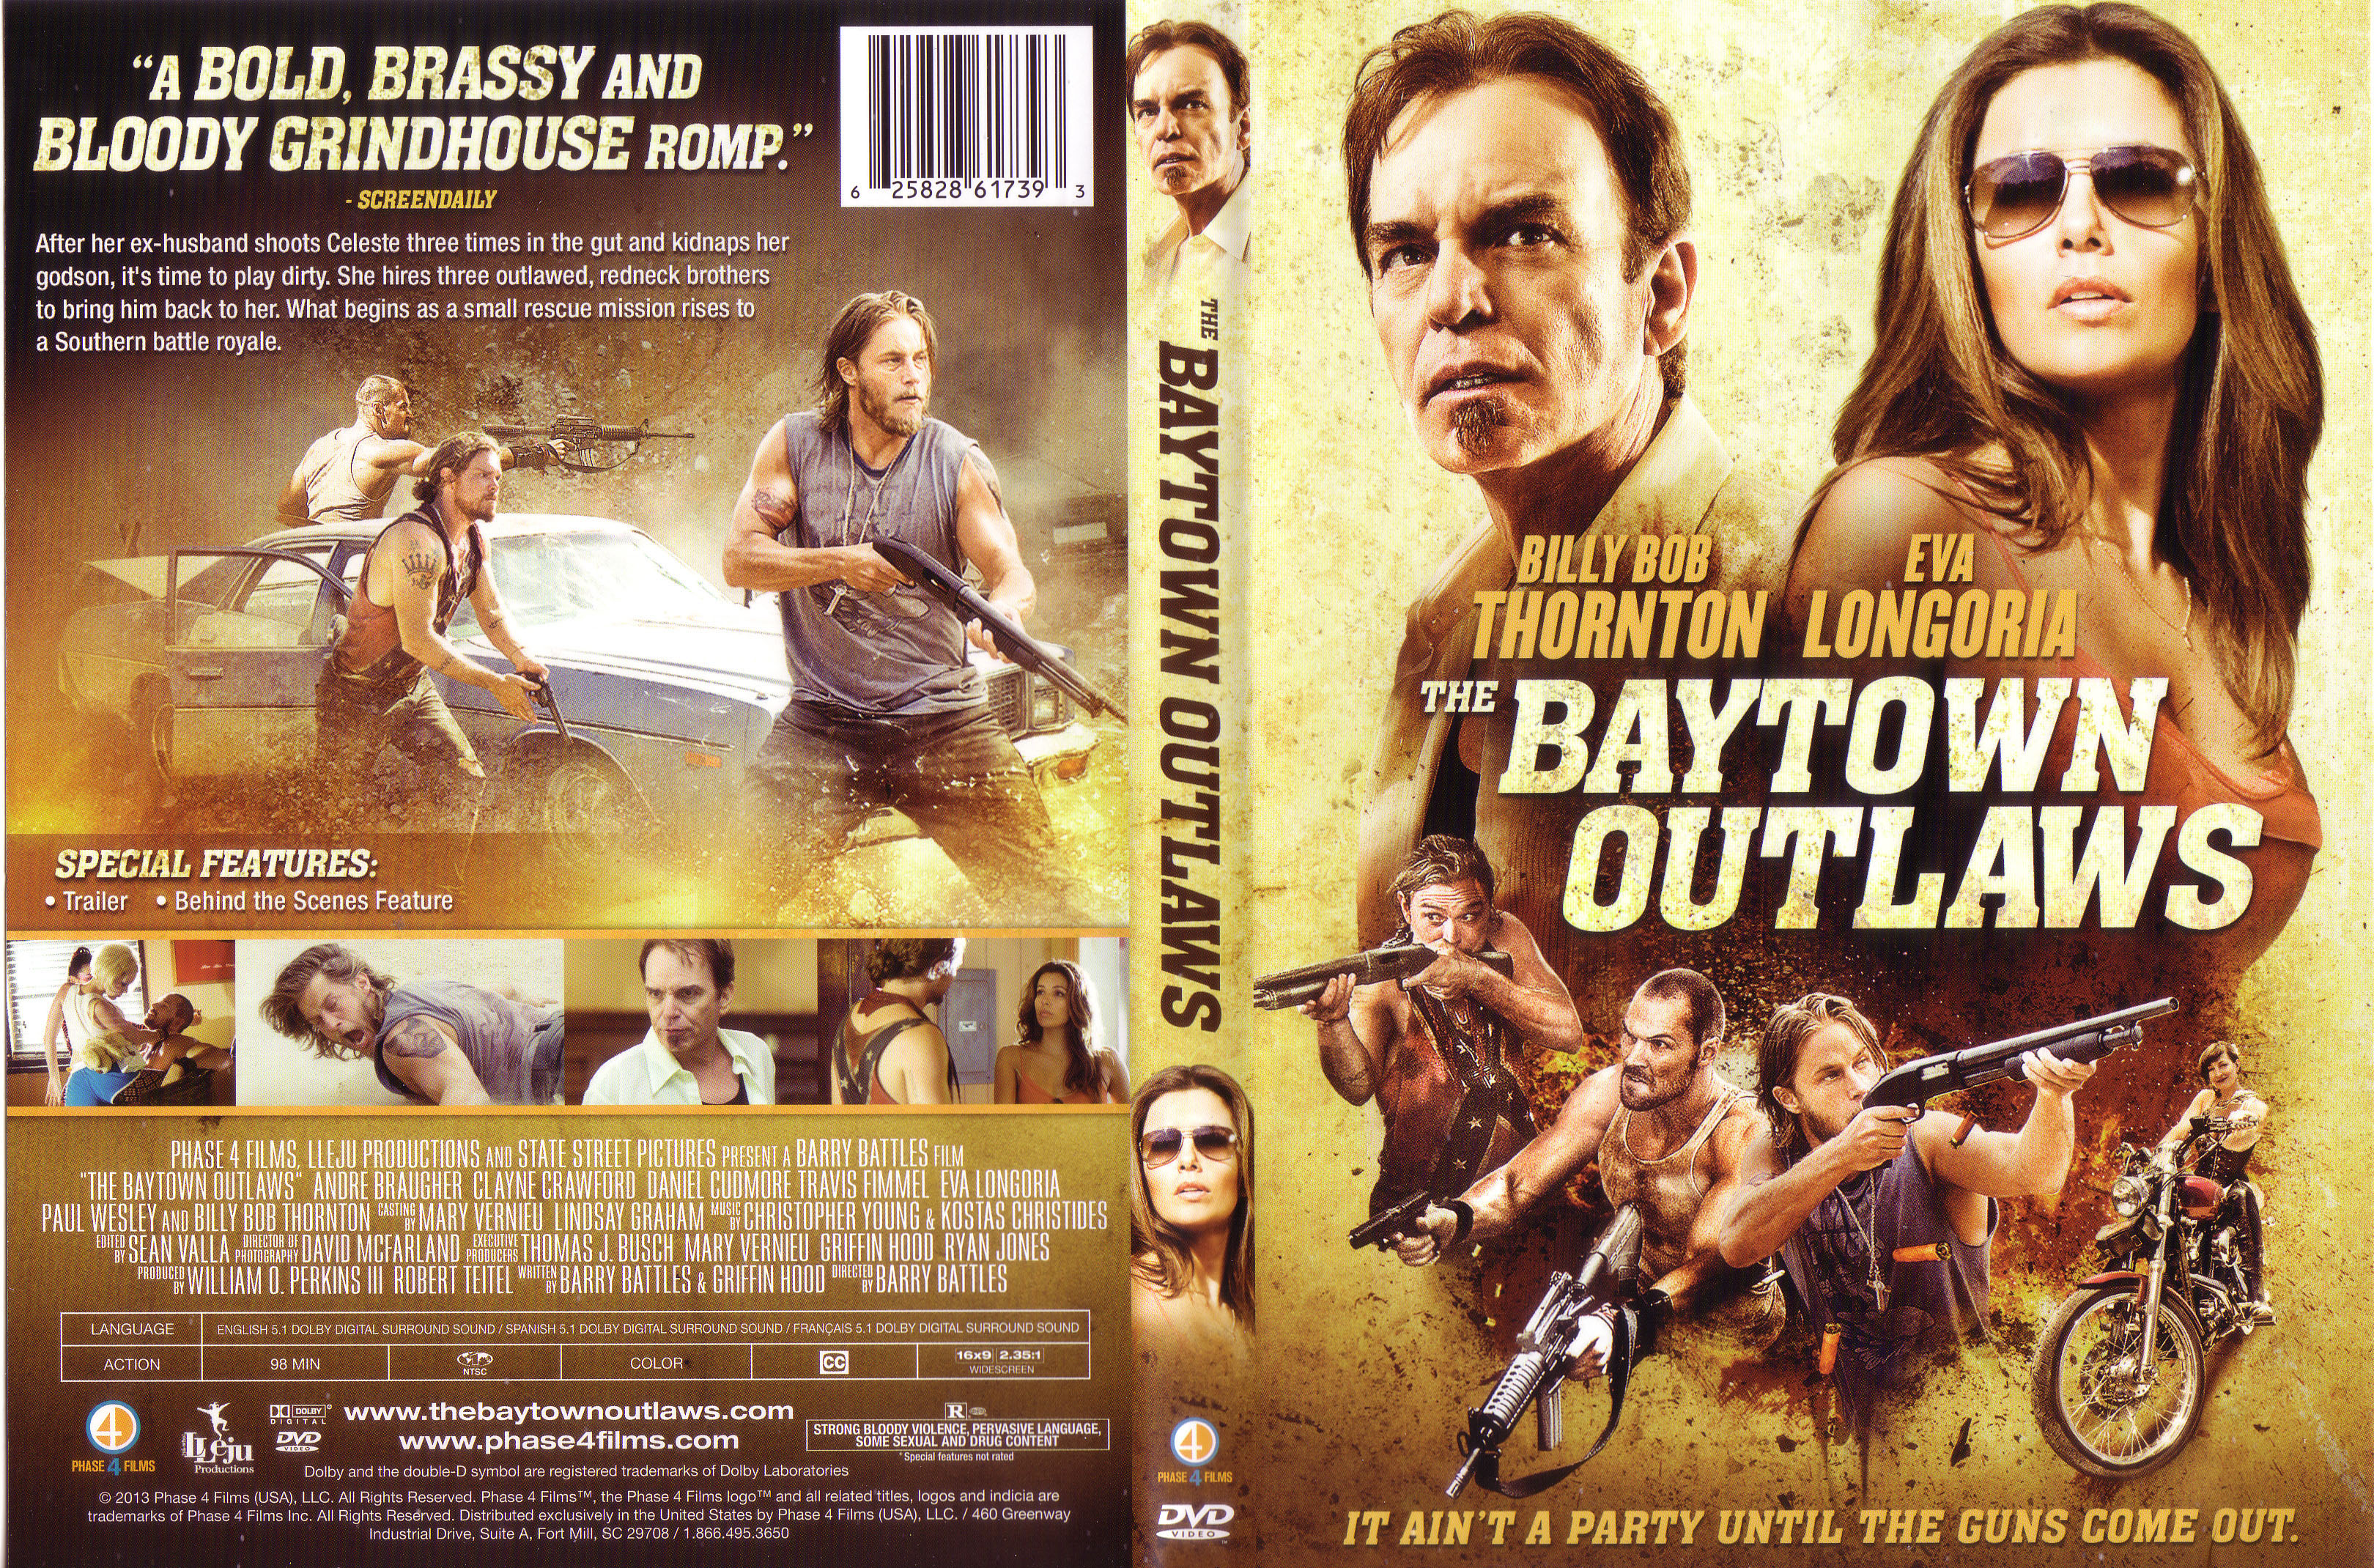 The Baytown Outlaws #16